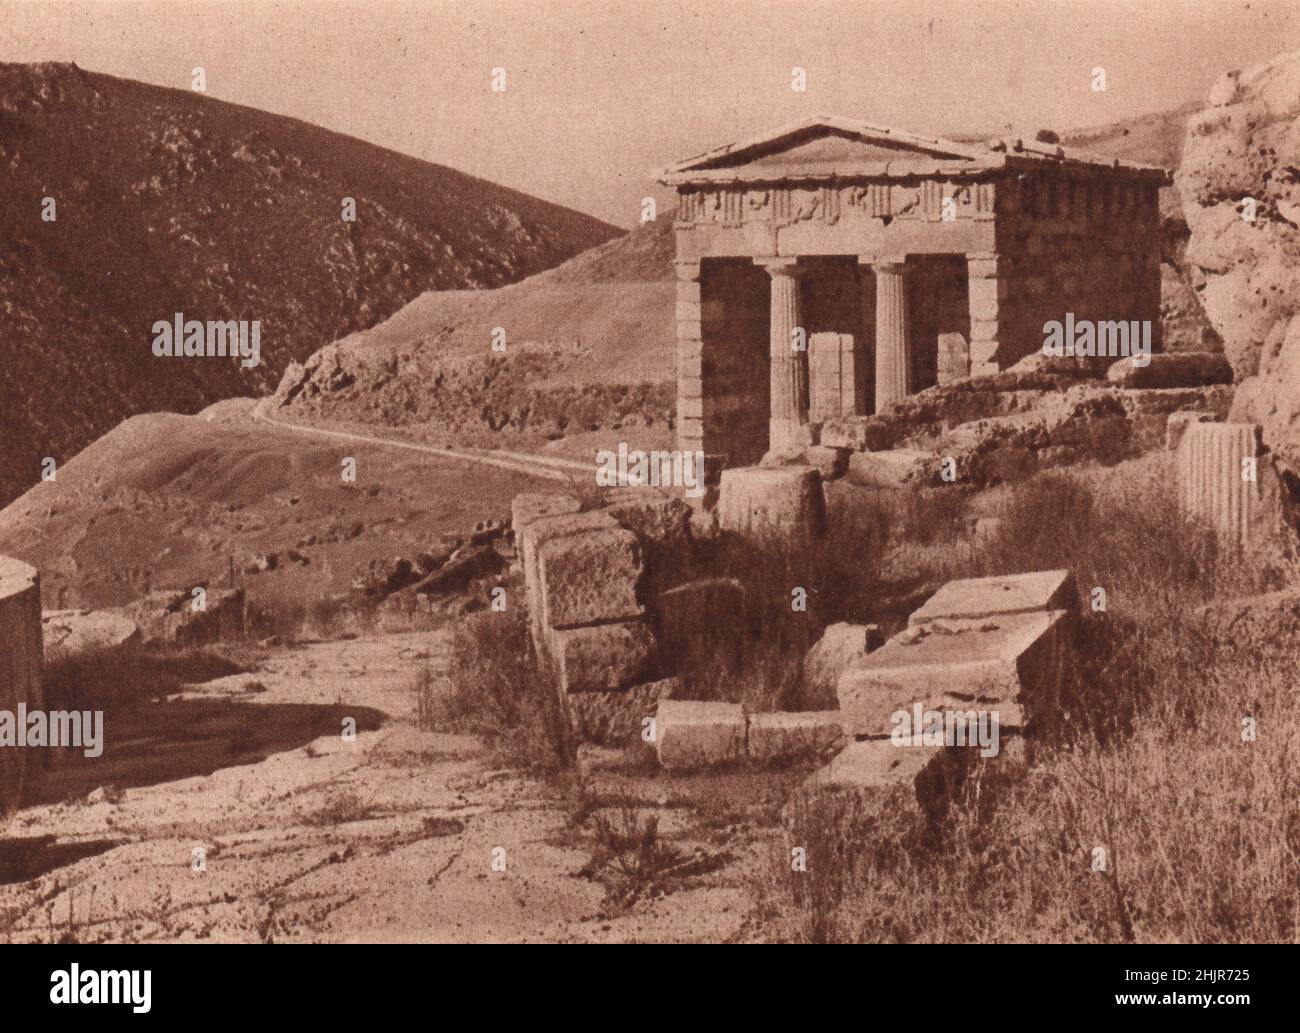 Amid the wonderful ruins of Delphi is the Doric building known as the Treasury of the Althenians, with its sculptured metops. Greece (1923) Stock Photo